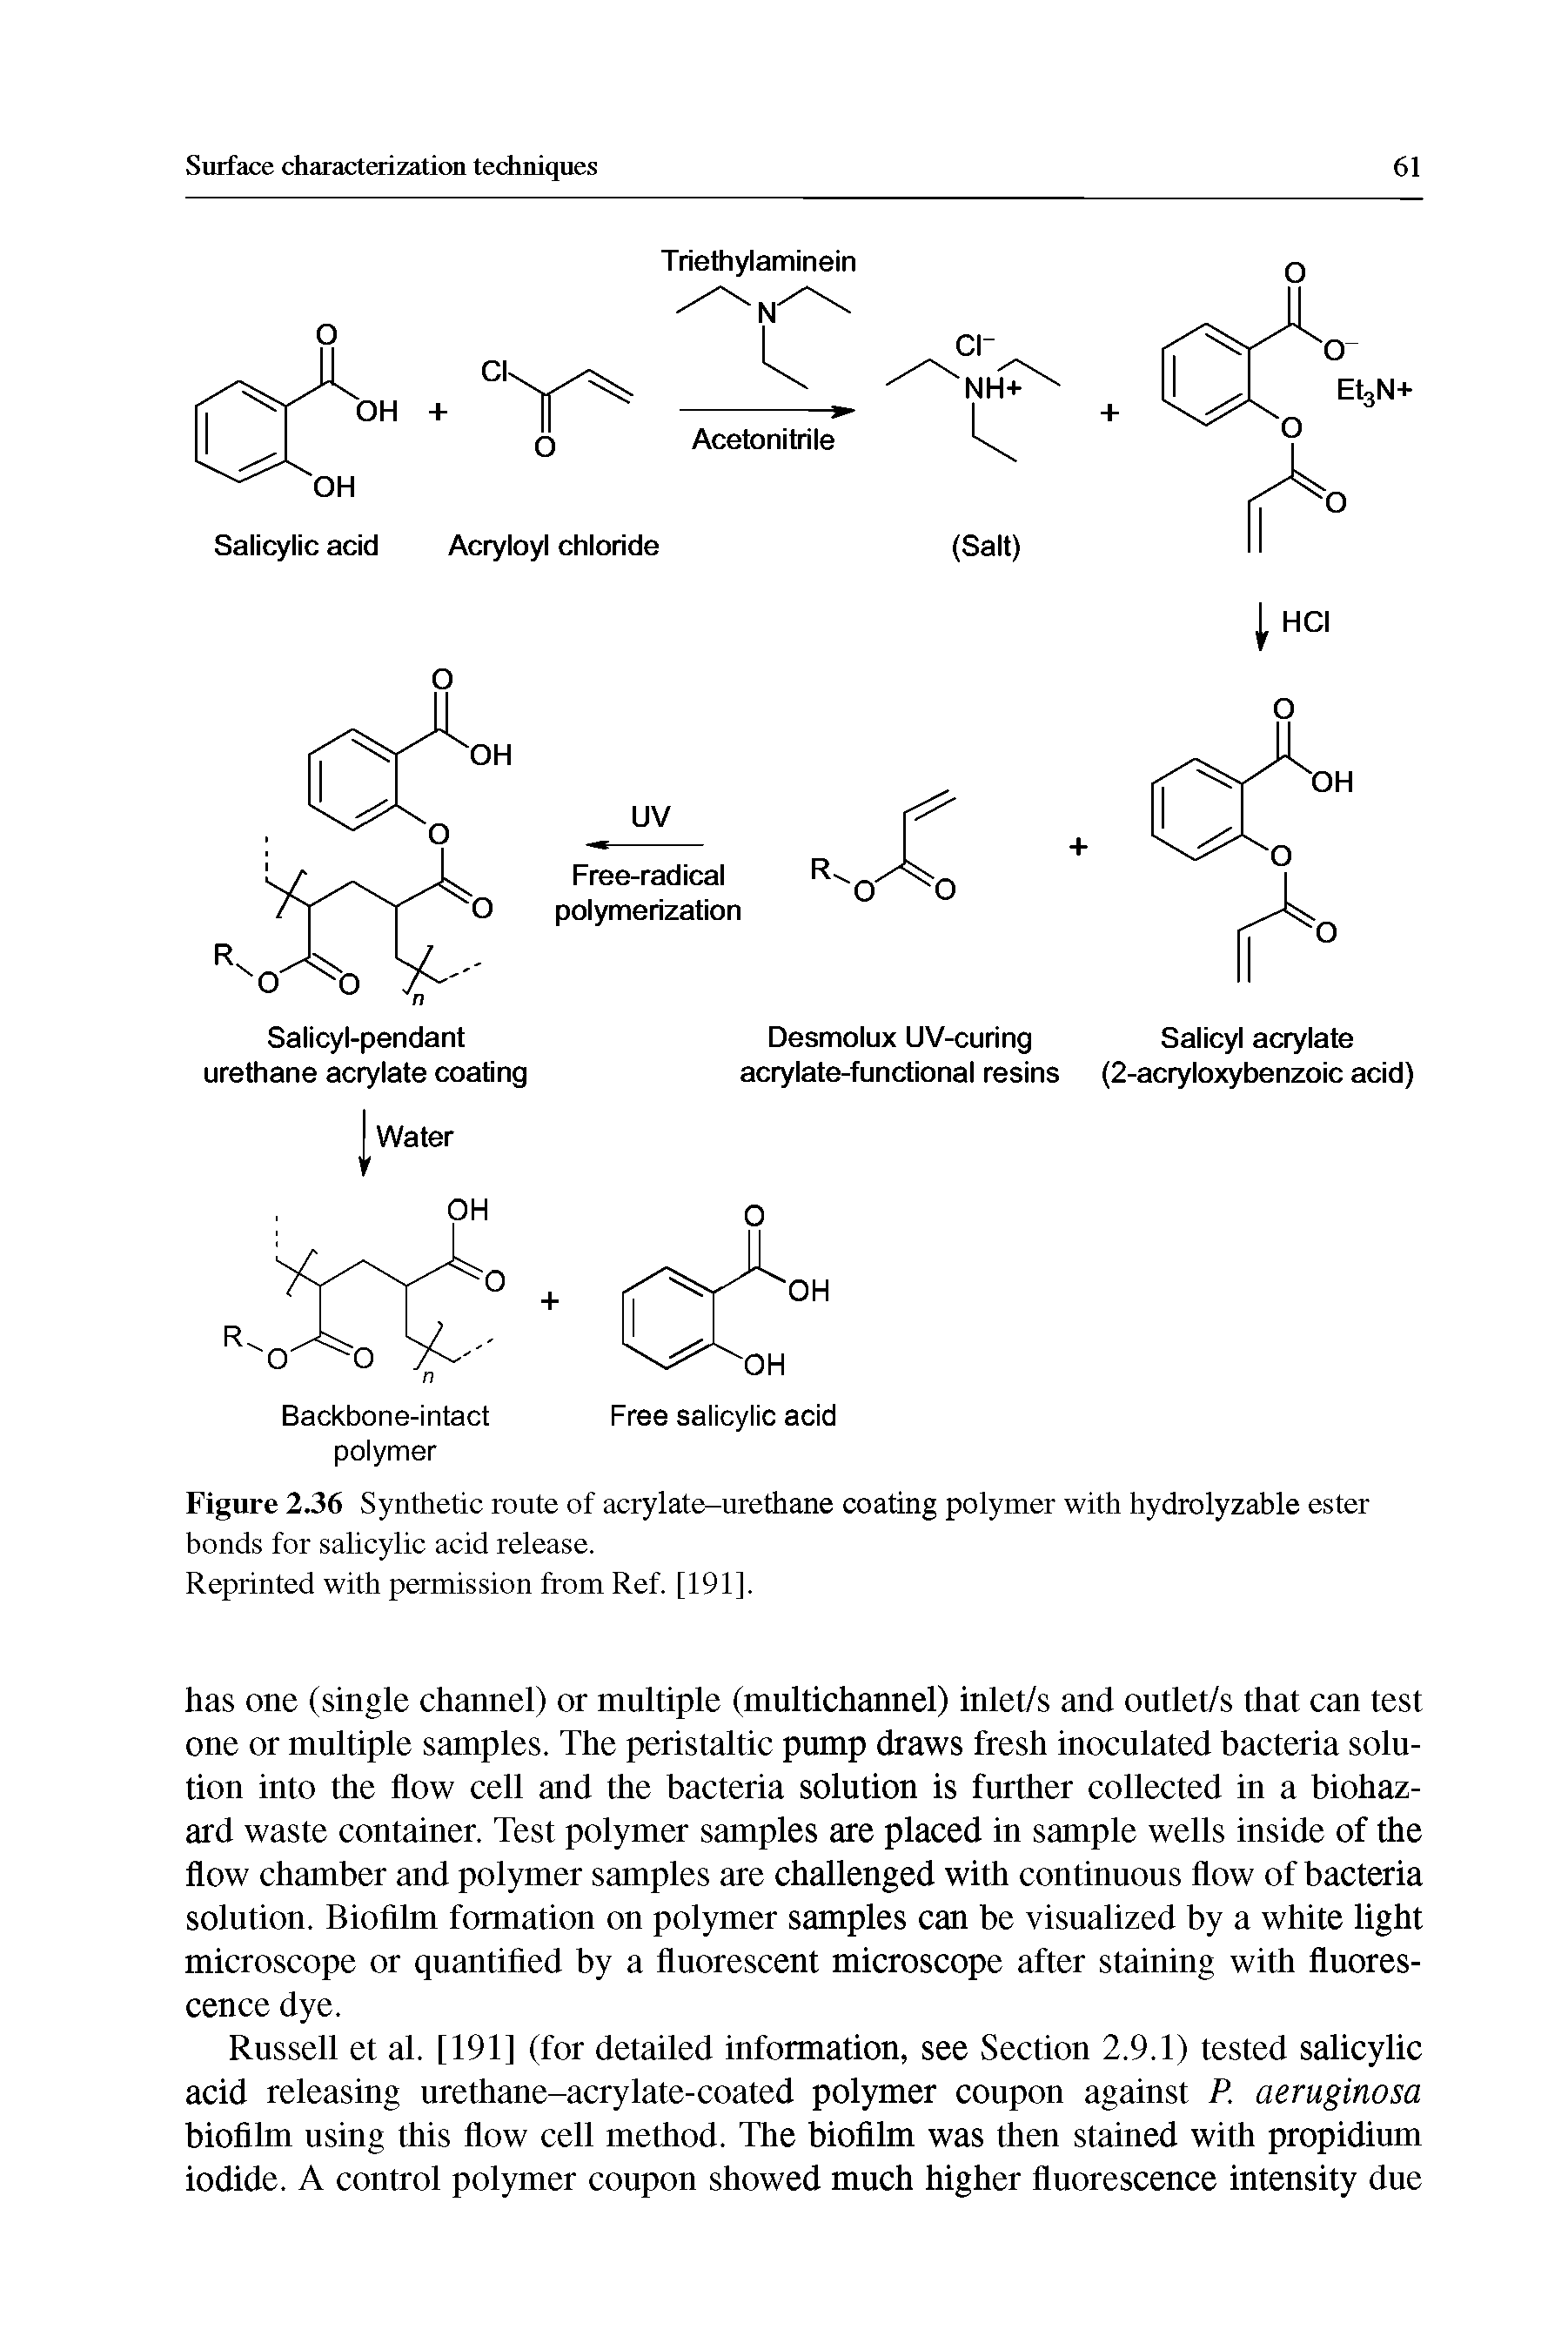 Figure 2.36 Synthetic route of acrylate-urethane coating polymer with hydrolyzable ester bonds for salicylic acid release.